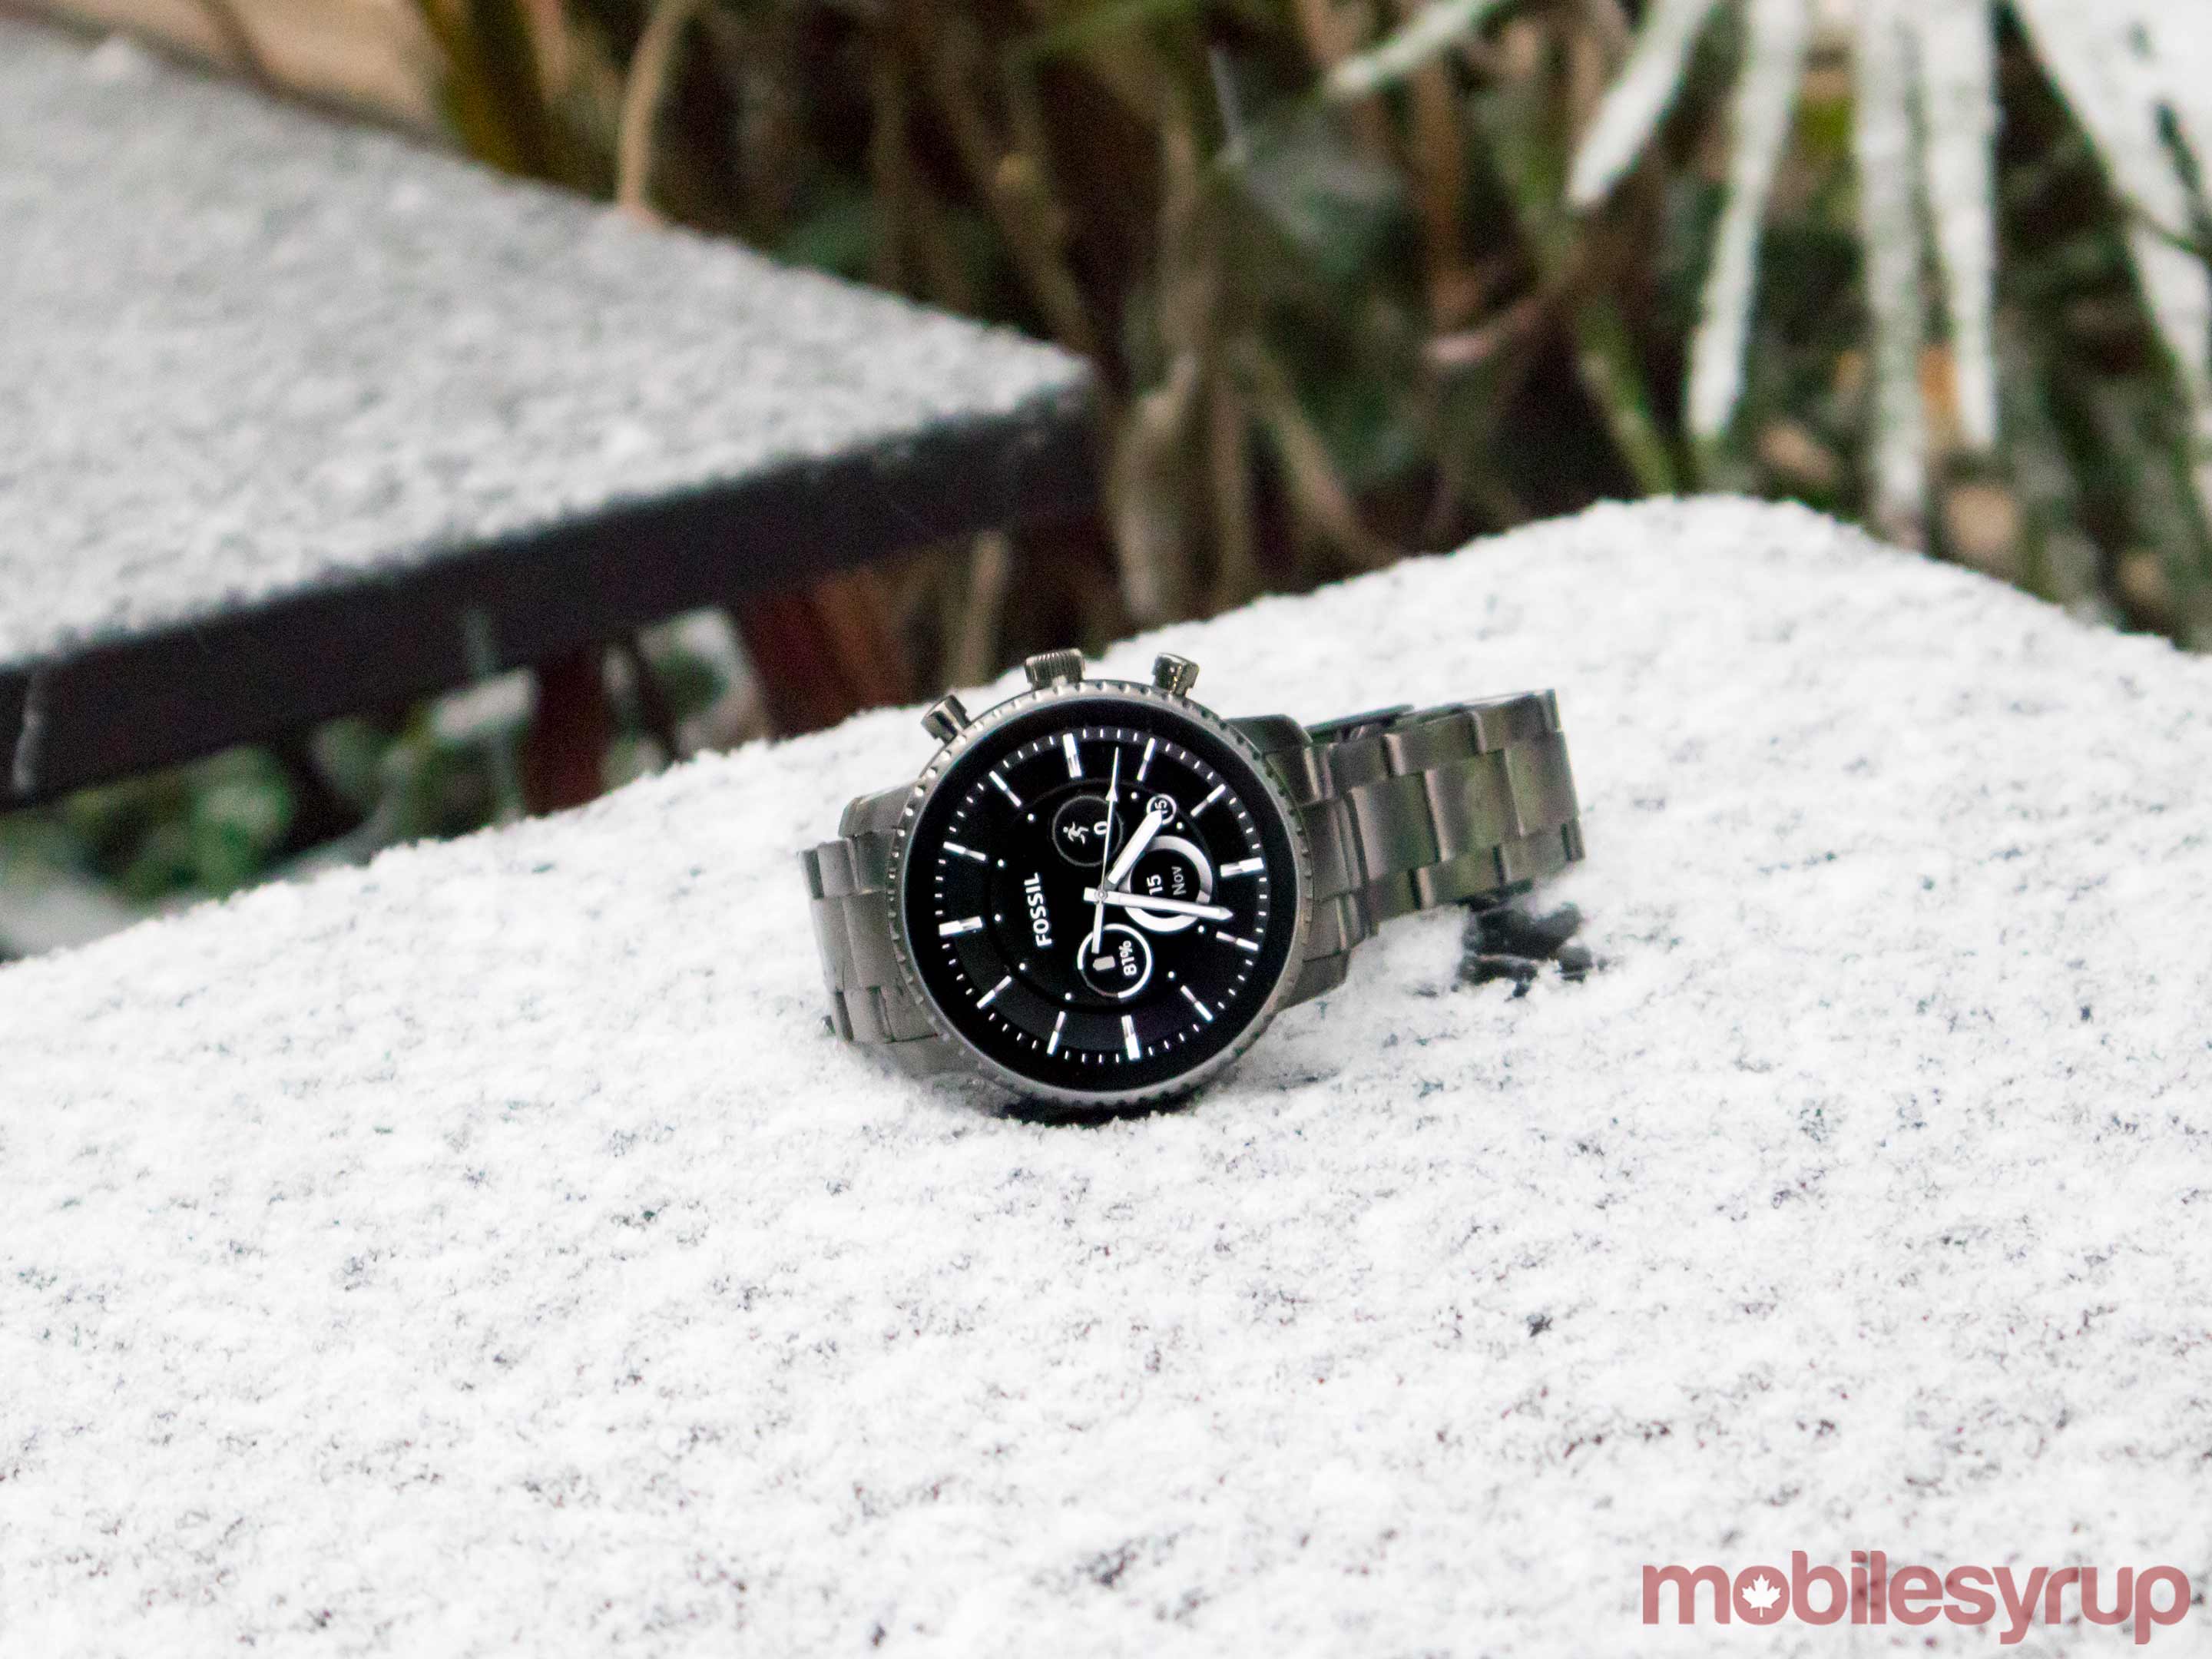 Fossil's Q Explorist HR is a great entry-level smartwatch